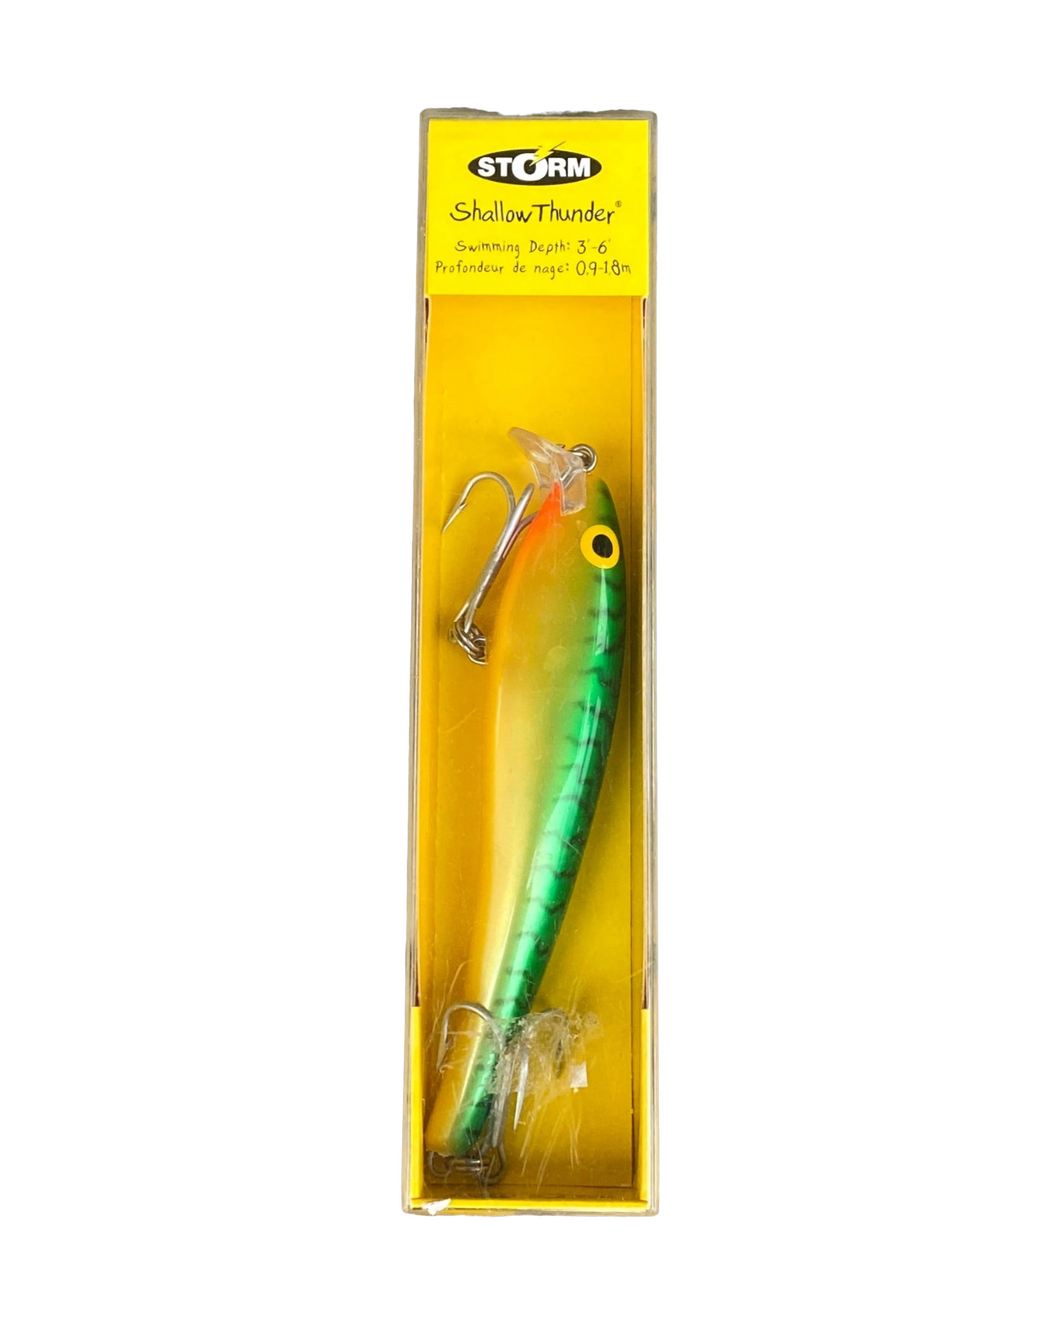 Toad Tackle • ToadTackle.net • Storm Shallow Thunder Fishing Lure – STH11 446 GREEN MACKEREL